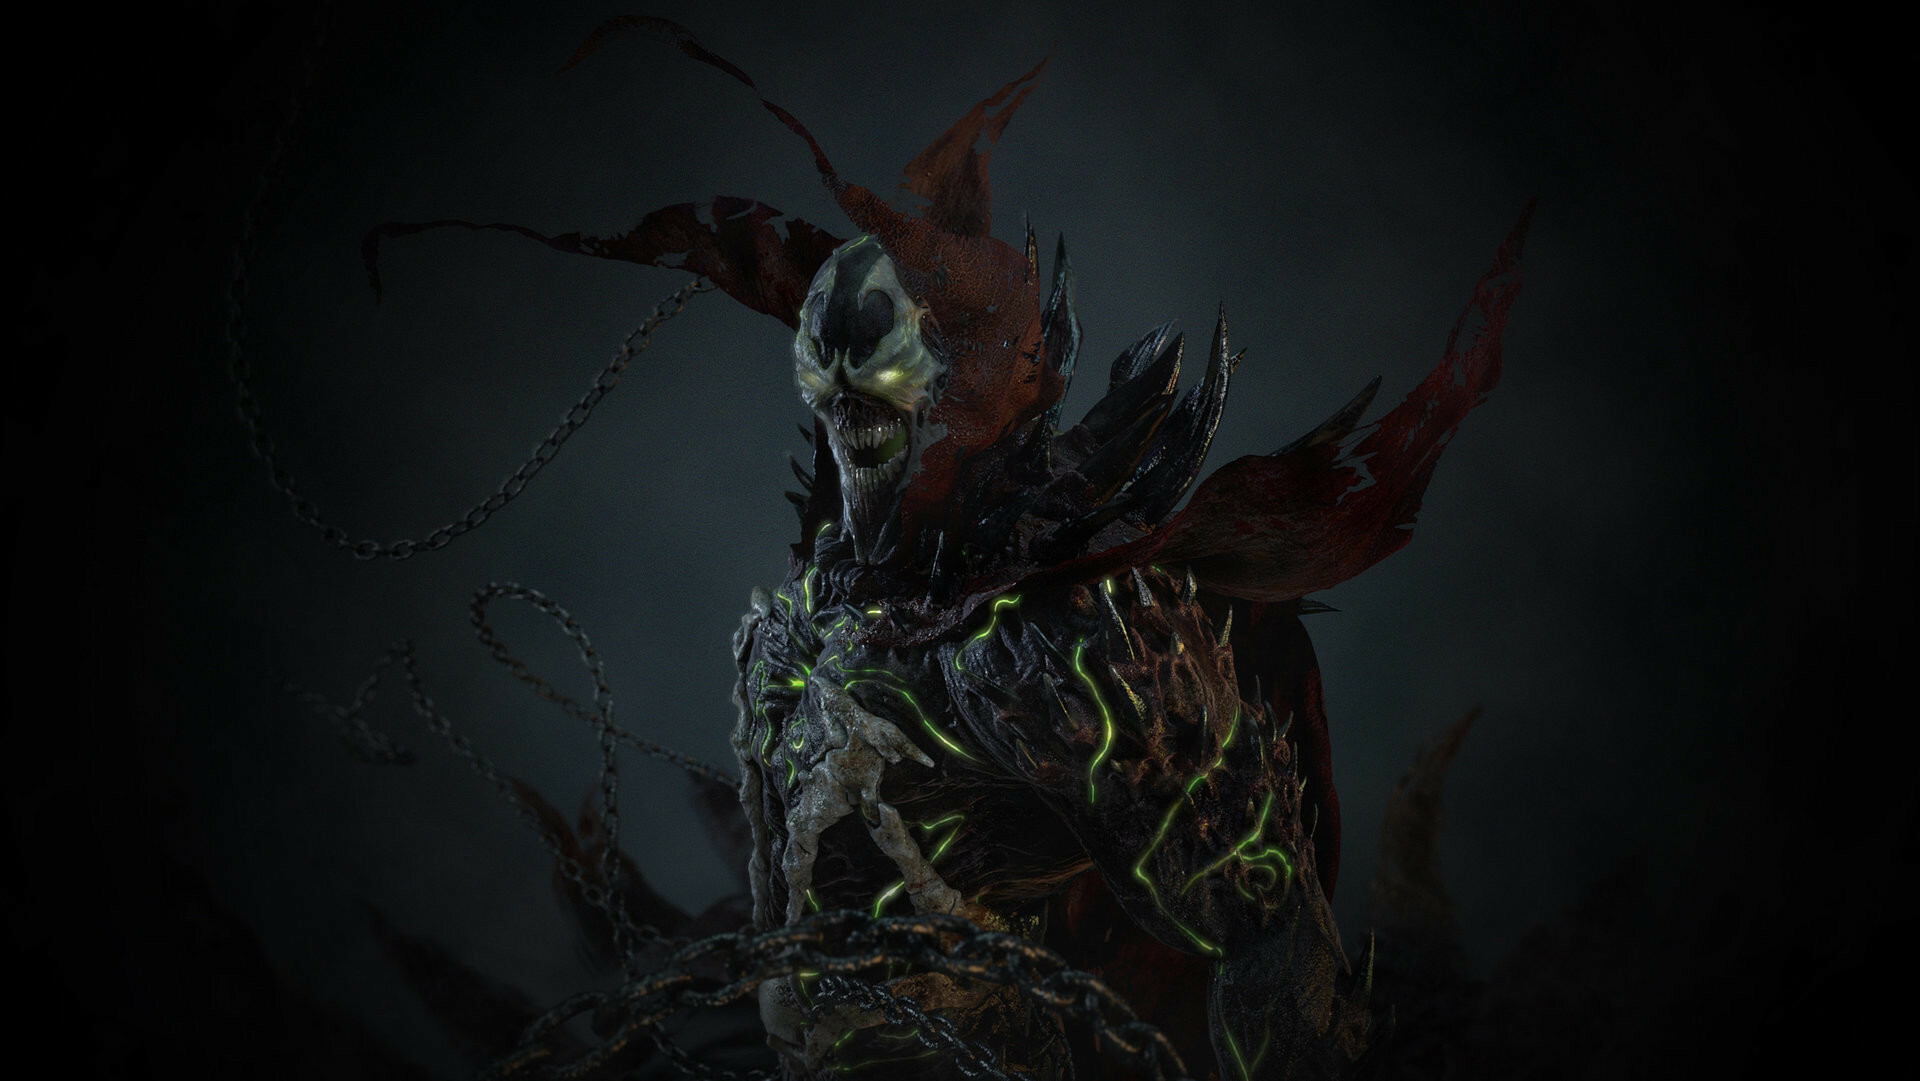 Hellspawn: Returned to earth in a bizarre, living costume capable of acting independently and changing form. 1920x1090 HD Background.